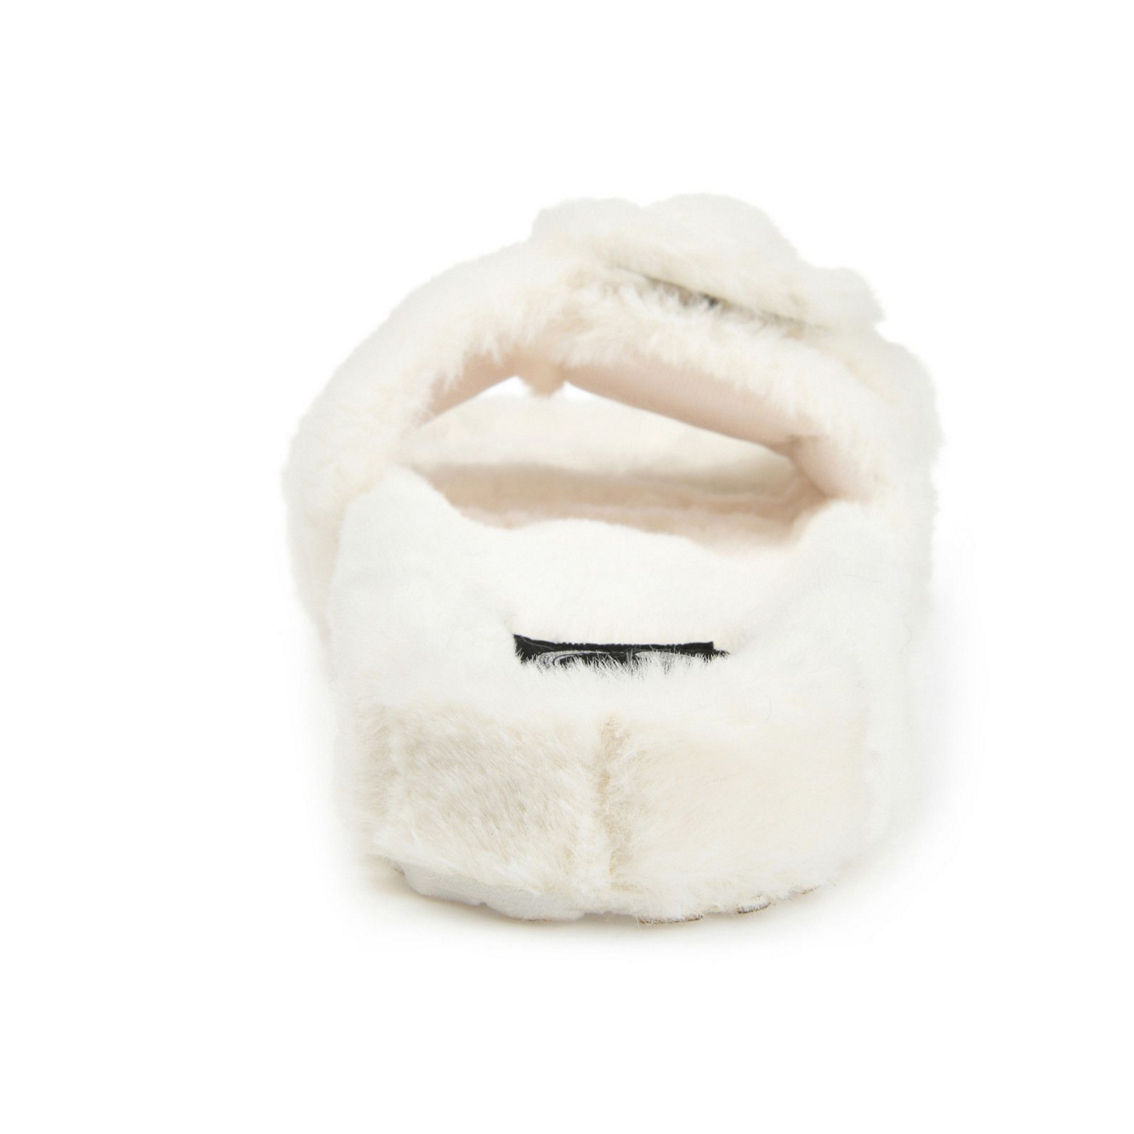 Journee Collection Women's Faux Fur Shadow Slipper - Image 3 of 5